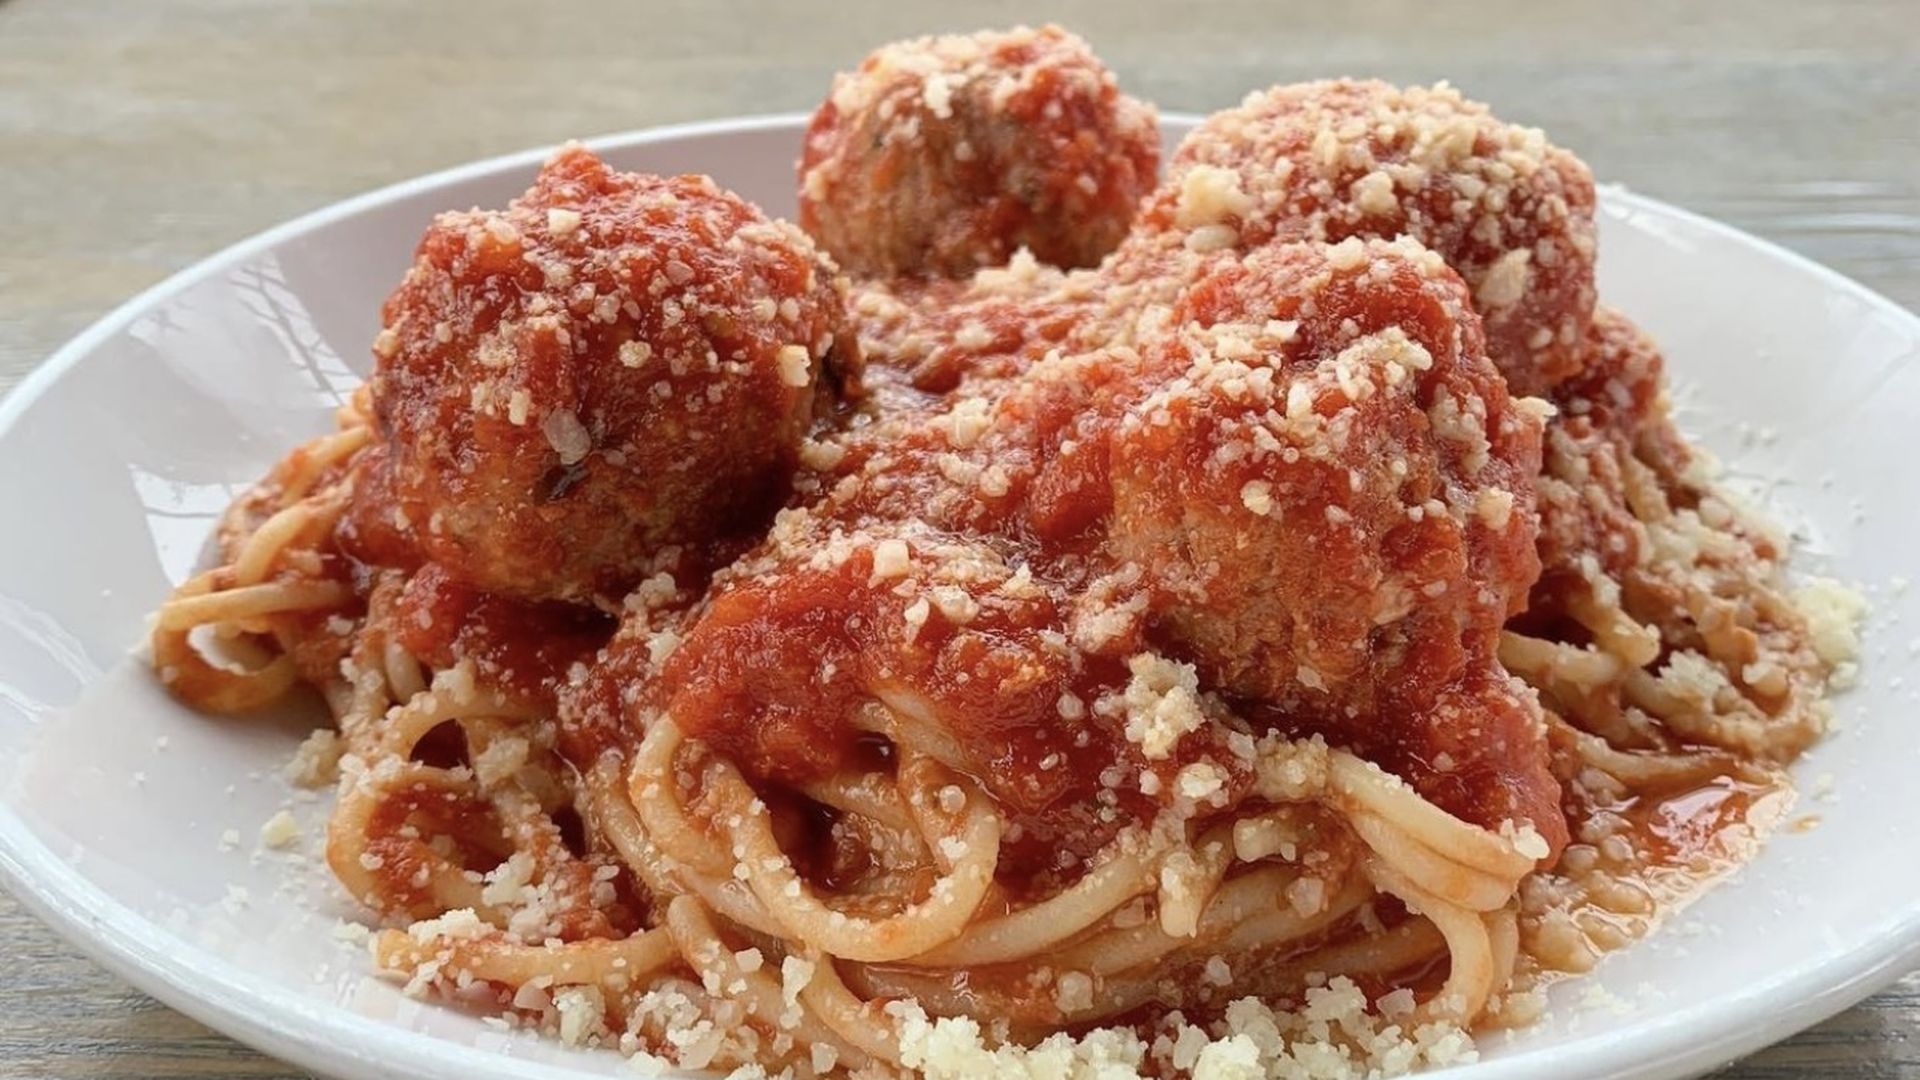 A plate of meatballs with spaghetti